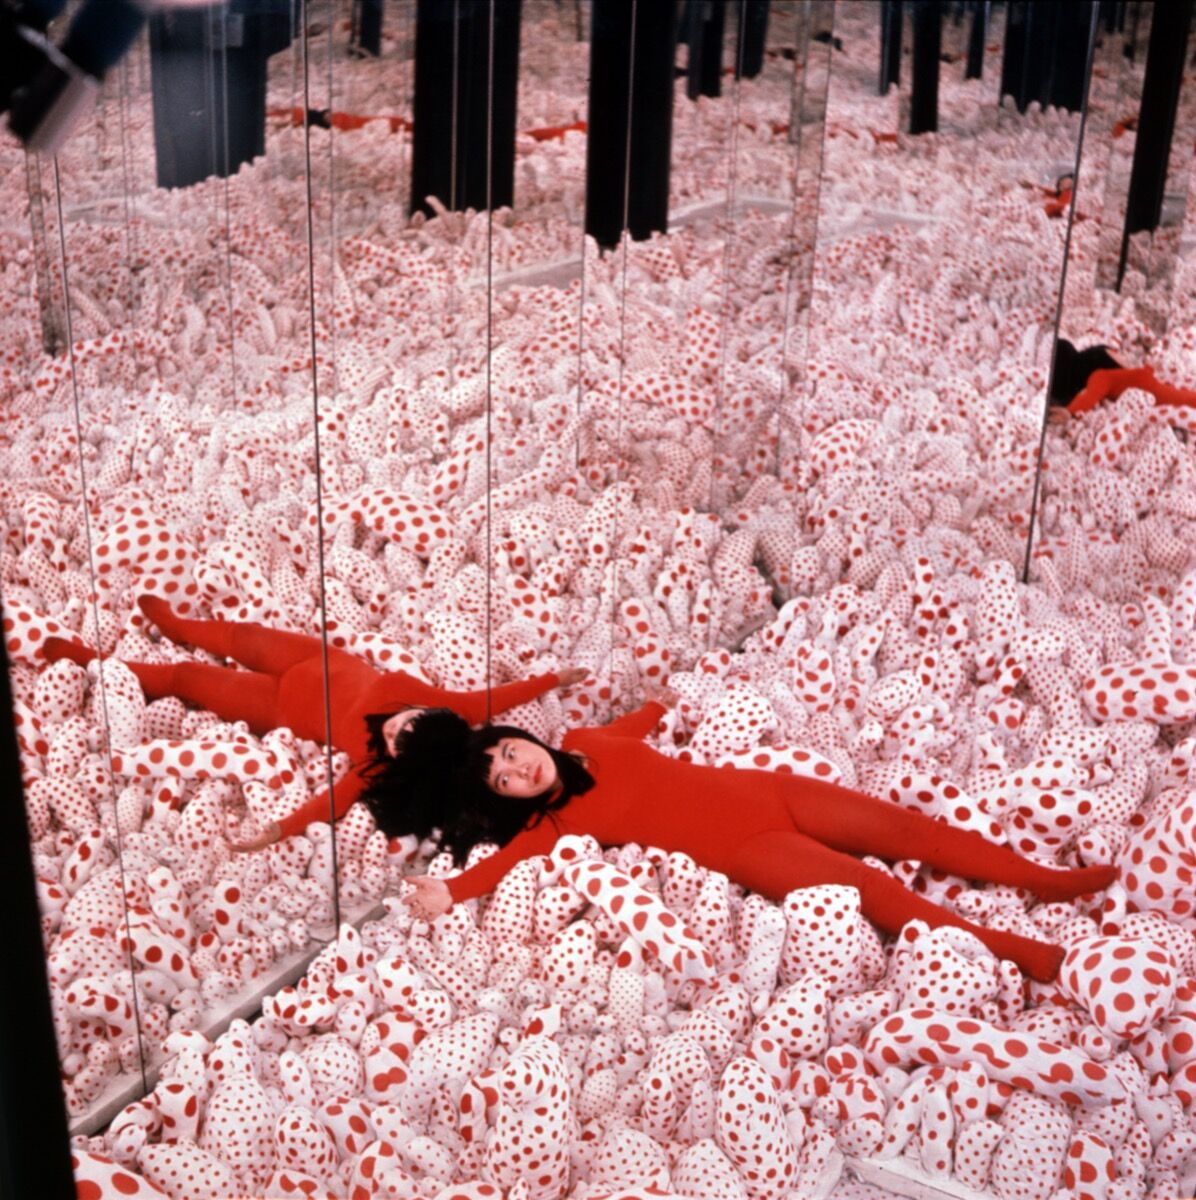 Yayoi Kusama S Infinity Rooms Made Accessible To People With